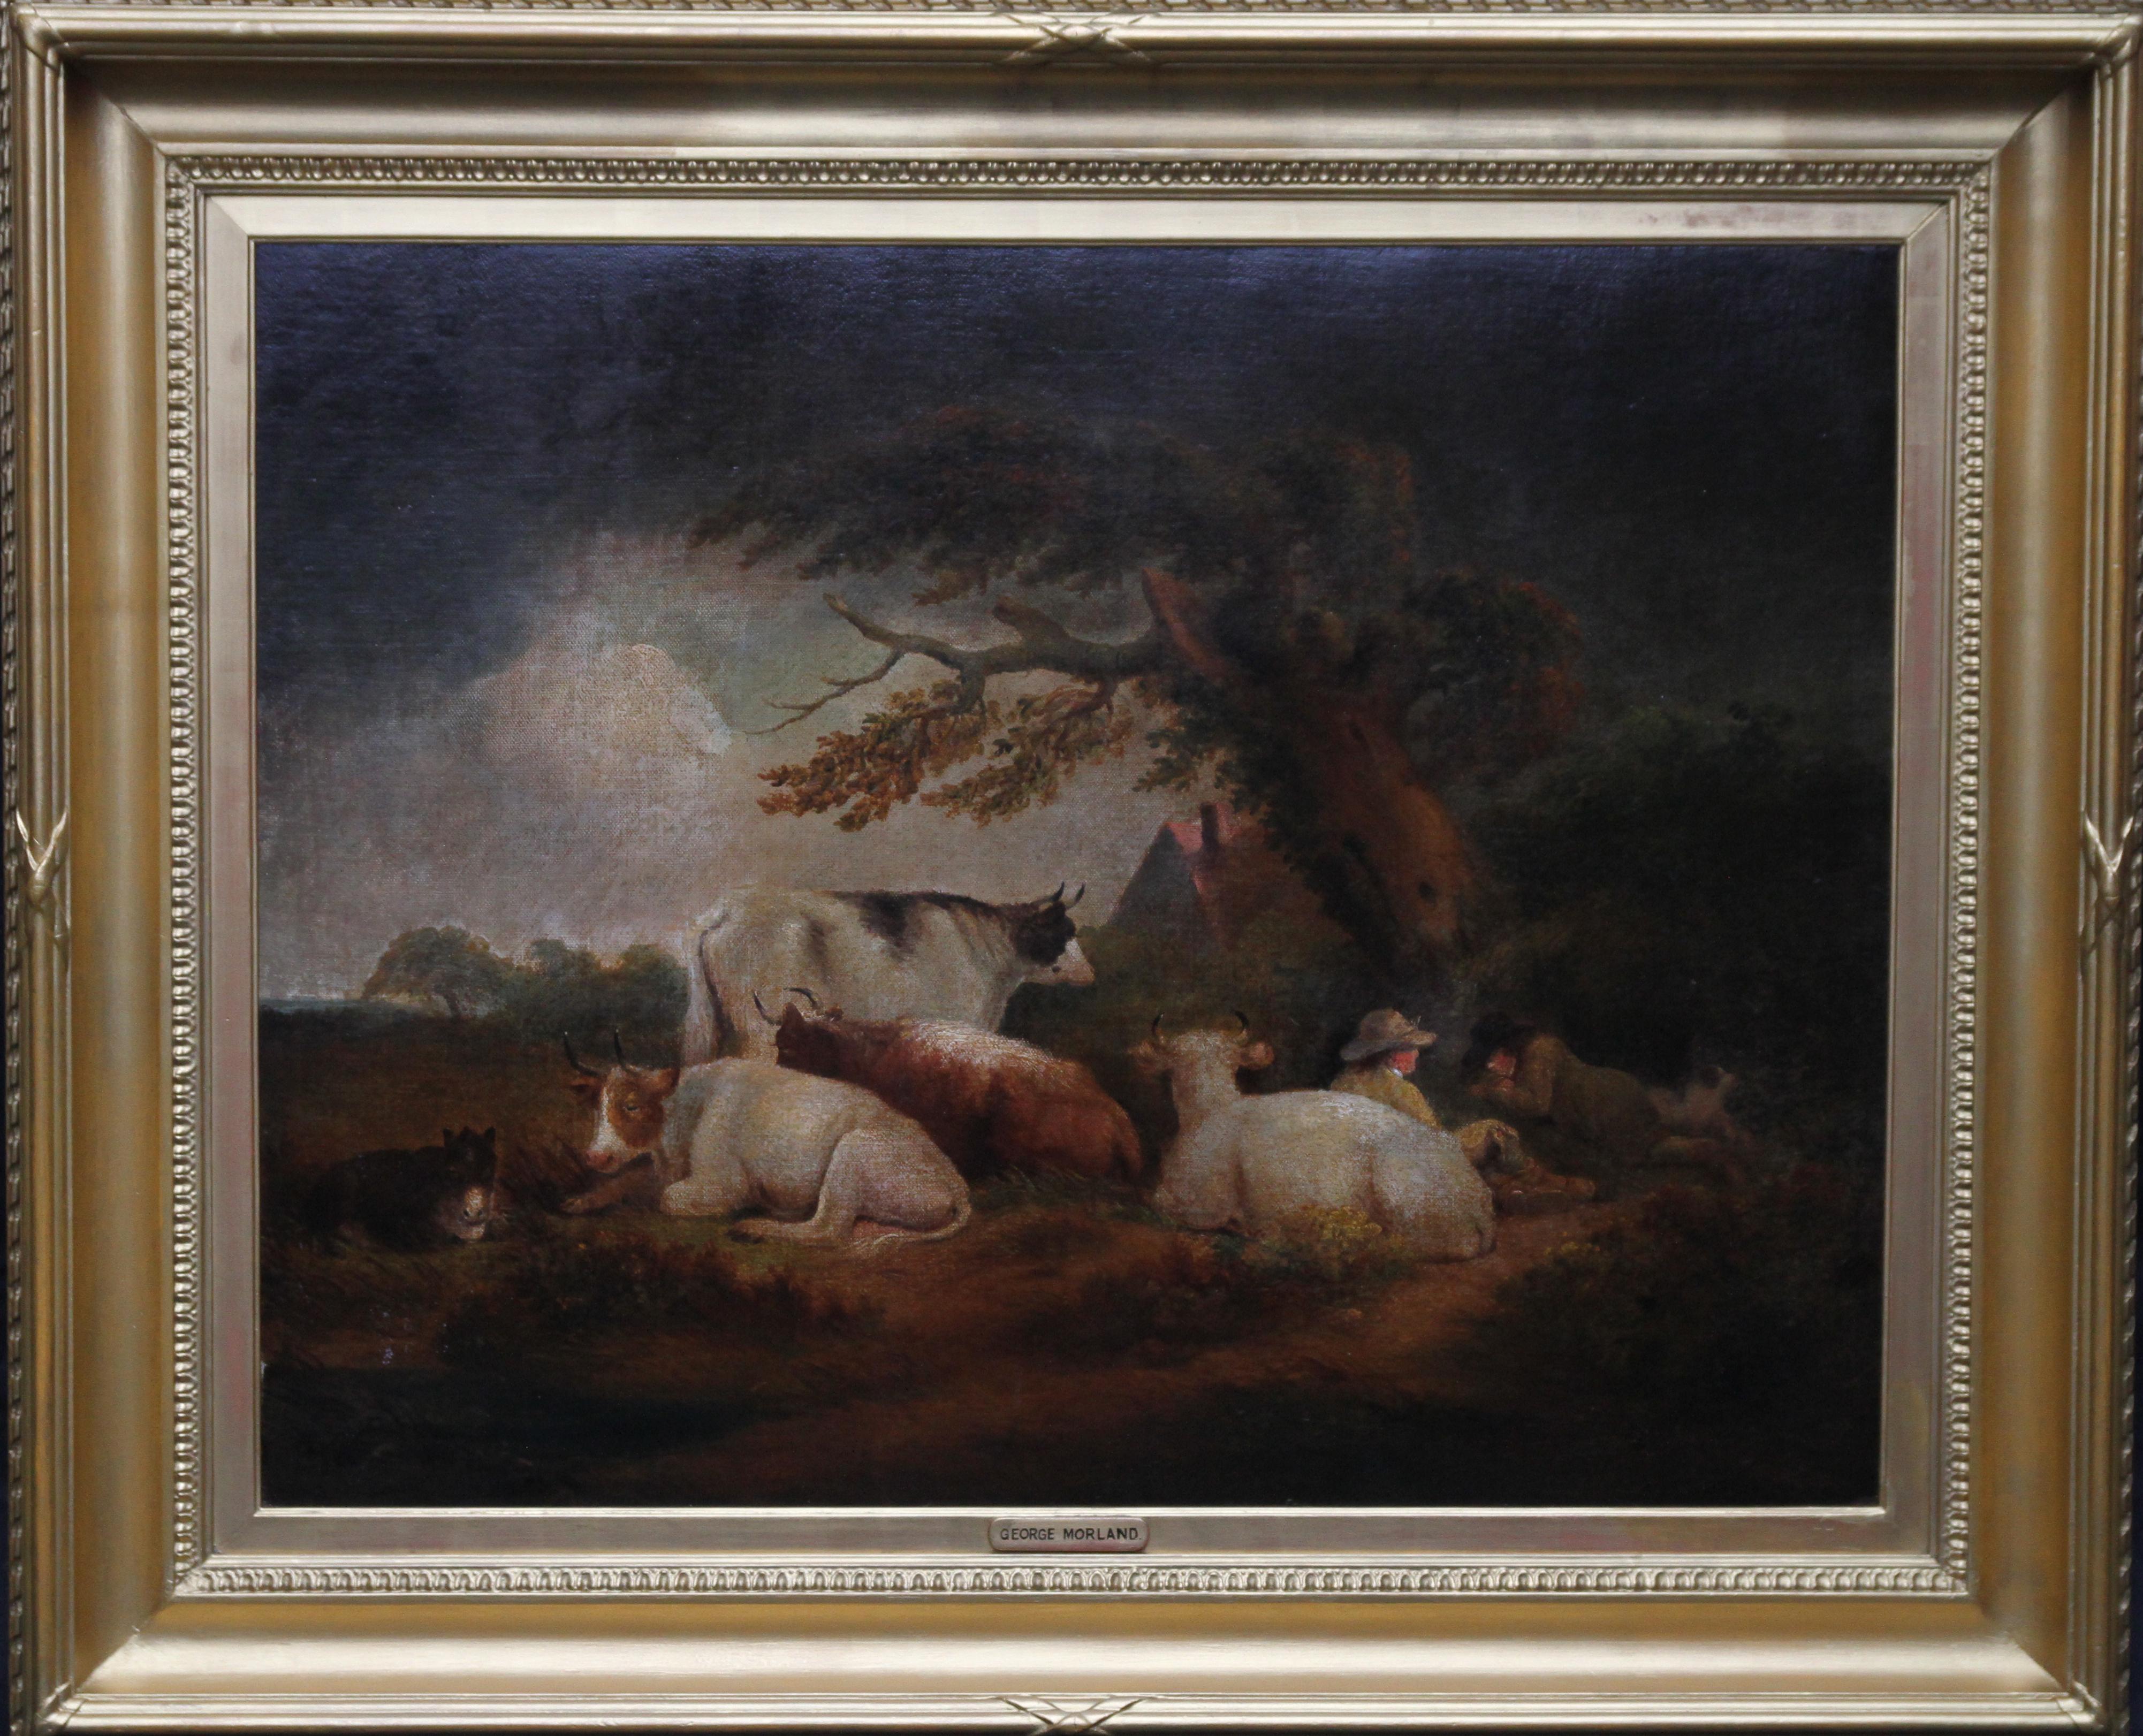 Attributed to George Morland Animal Painting - Cattle at Rest in a Landscape - British 18th century art pastoral oil painting